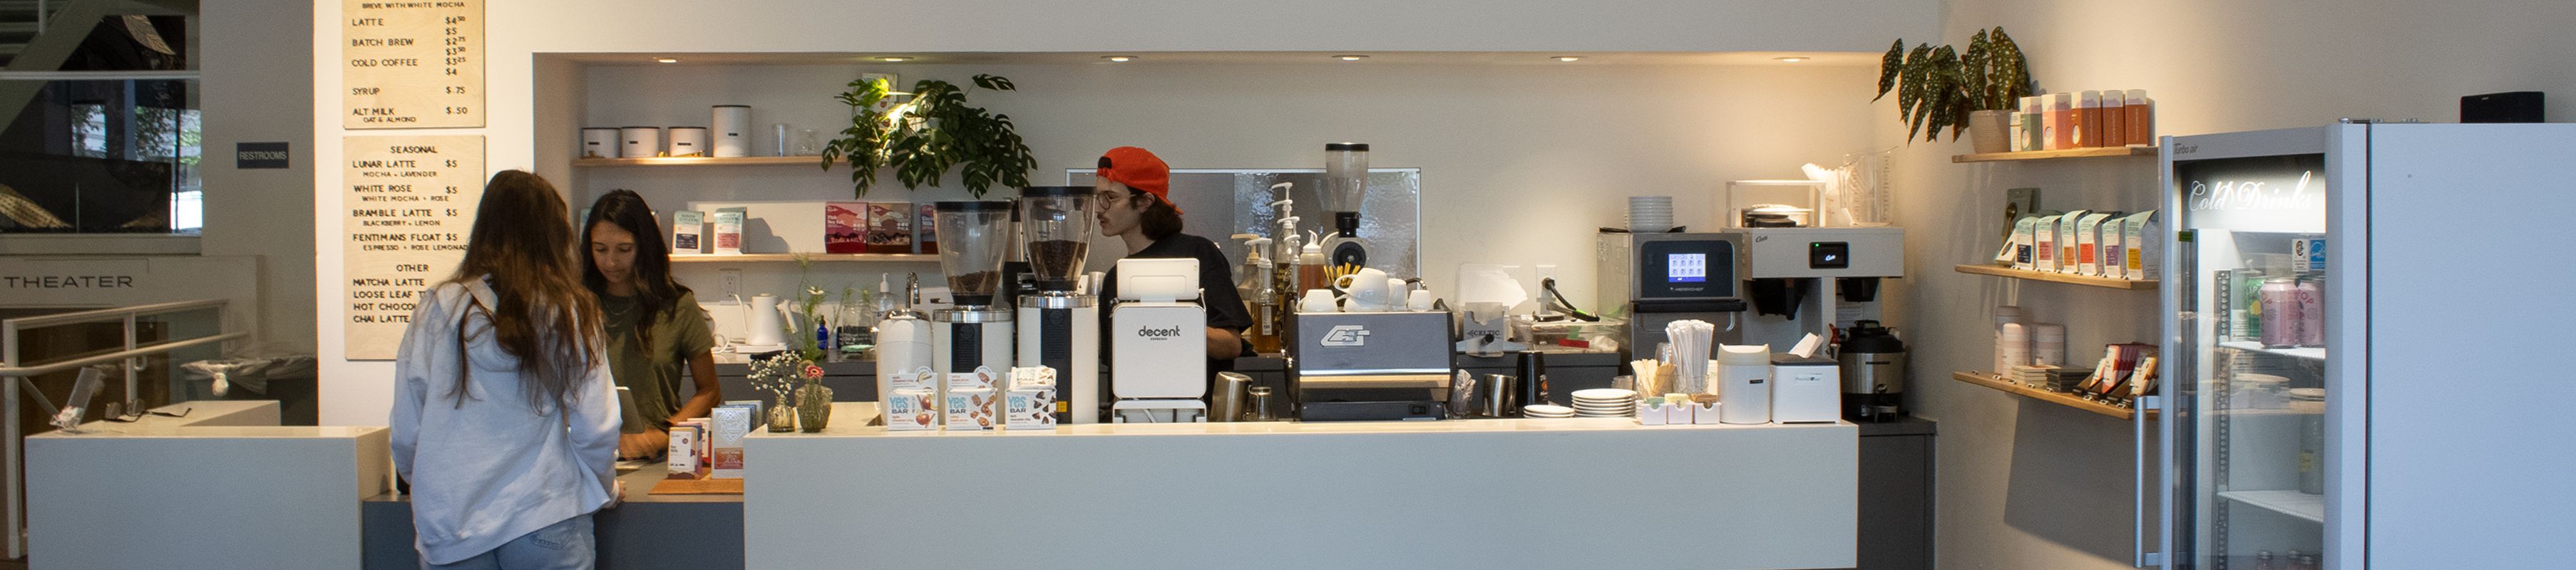 the Setlan Coffee counter inside the lobby of MOCA Jacksonville